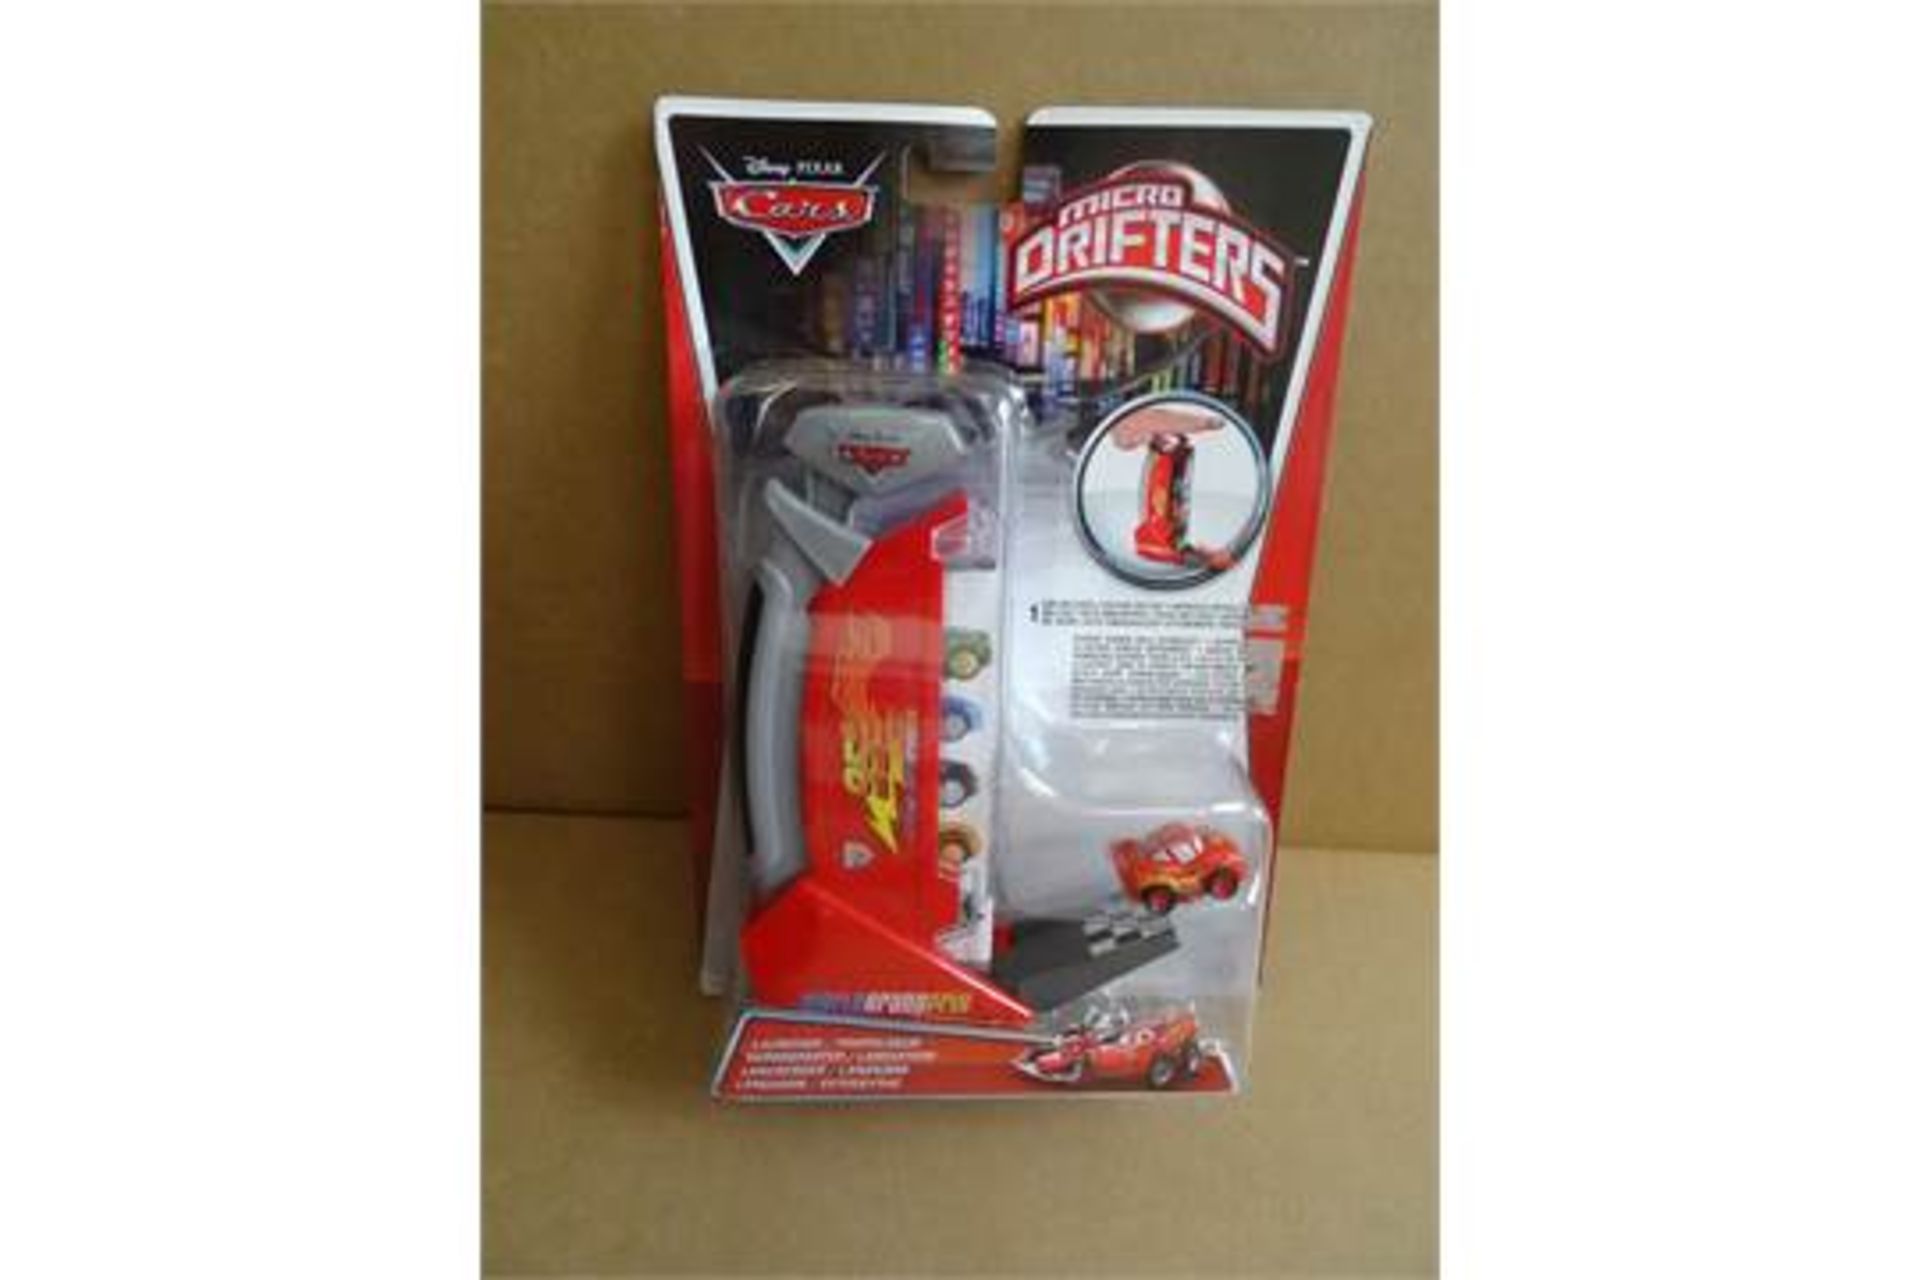 12 x Disney Pixar Cars Mattel Micro Drifters Launcer. Includes 1 car. Brand new and Packaged